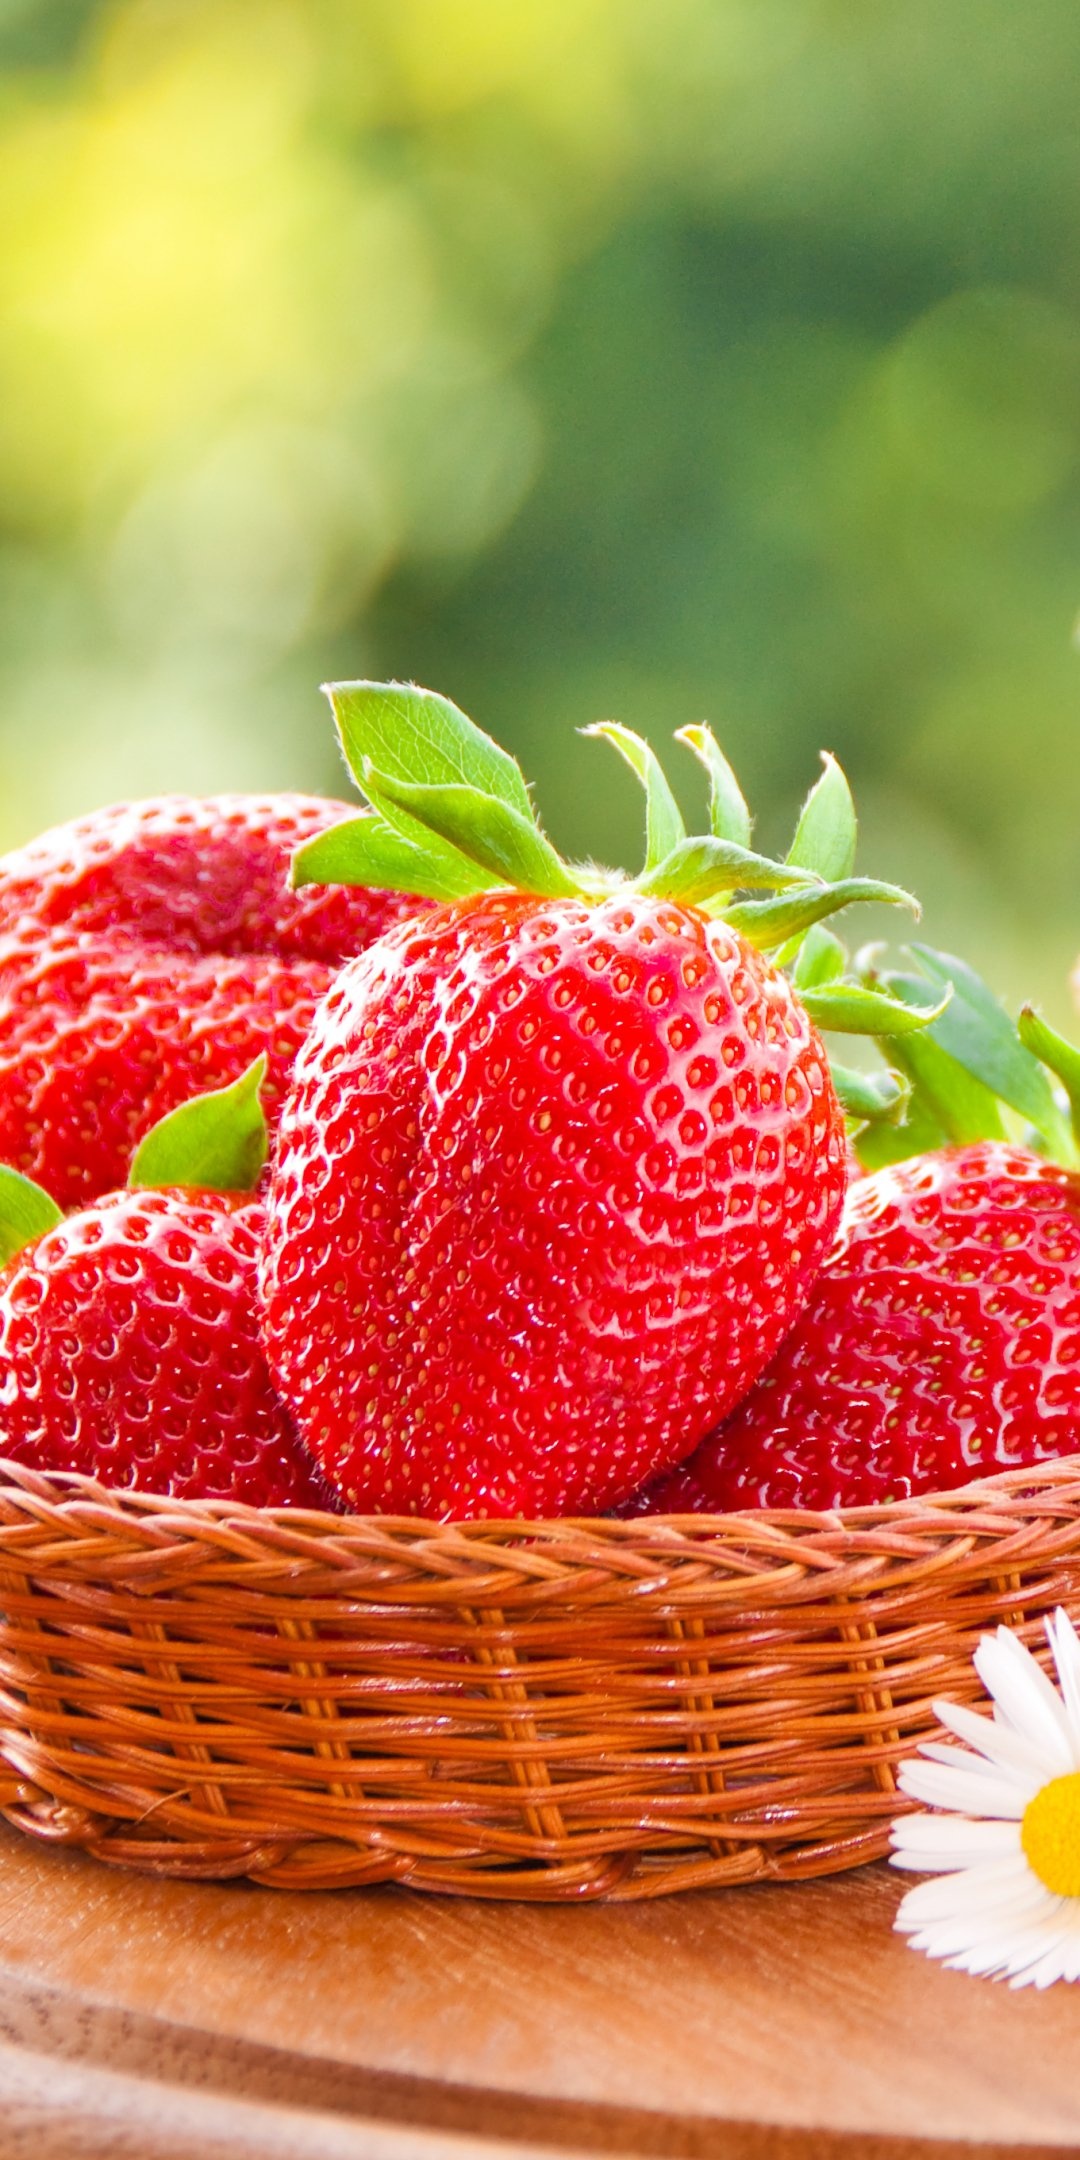 Strawberry: Harvested with part of the stem, which prolongs freshness of the fruit. 1080x2160 HD Wallpaper.